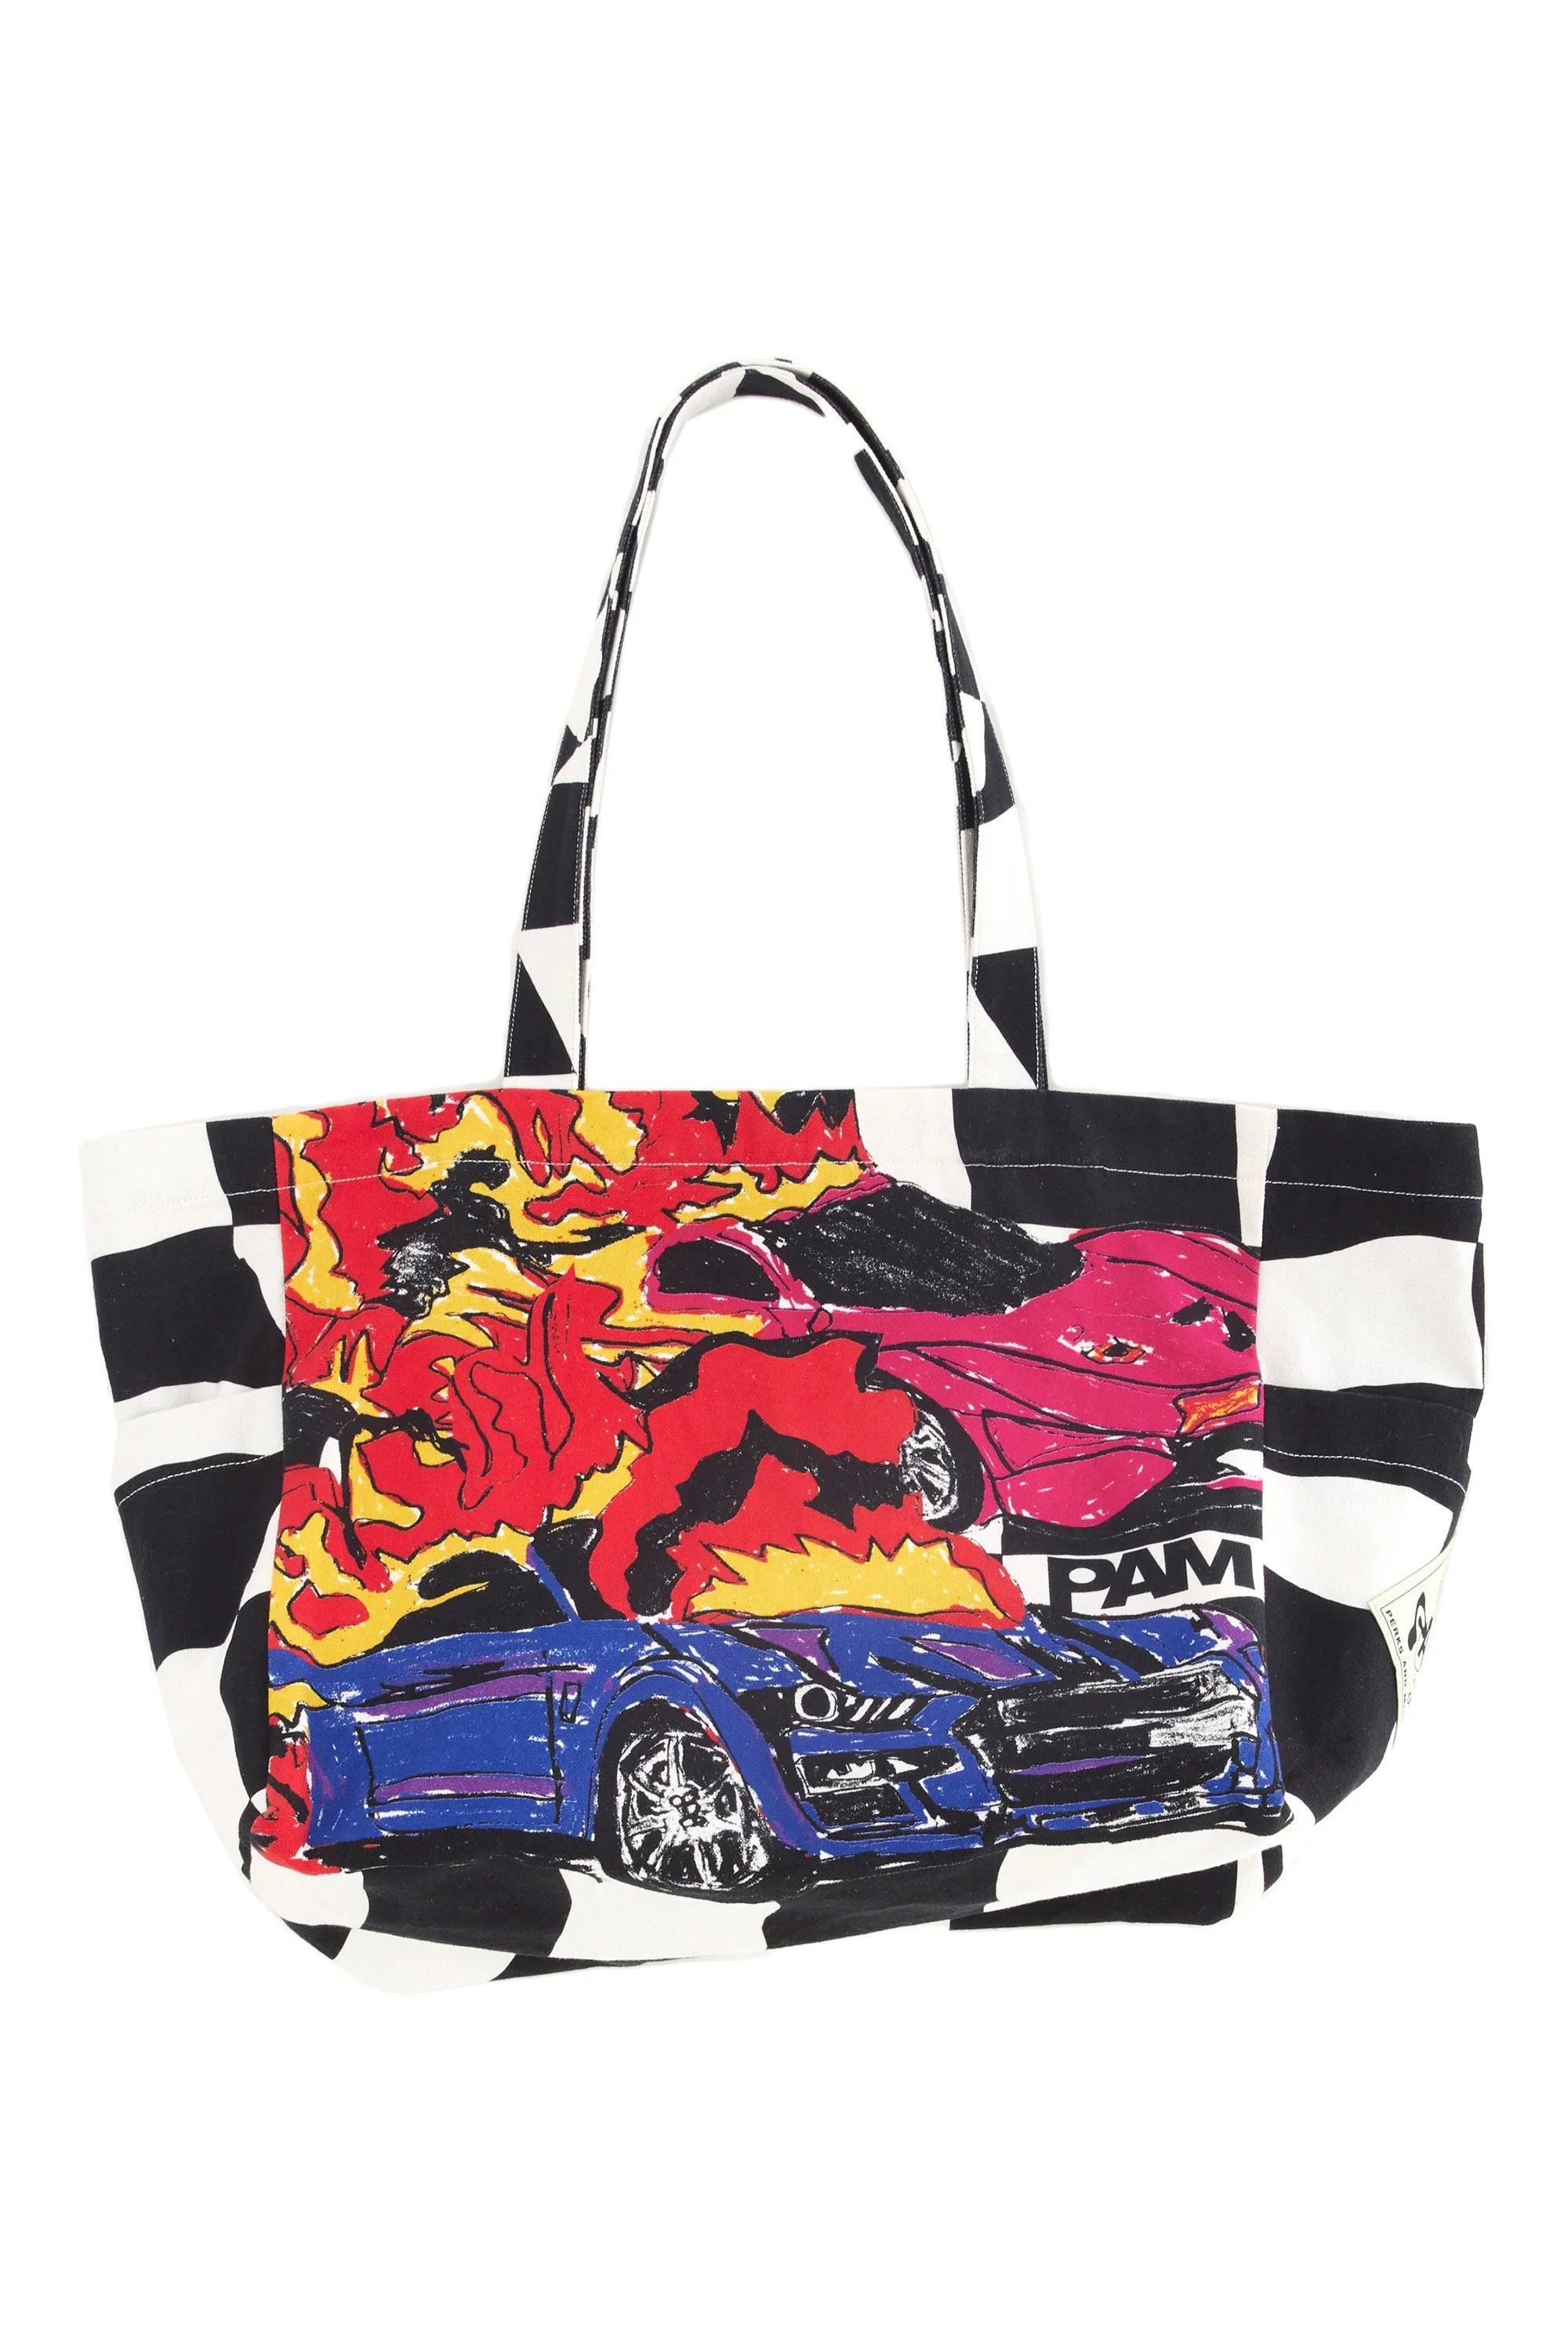 PAM / Perks and Mini - Engulfed Tote Bag - Multi - One size